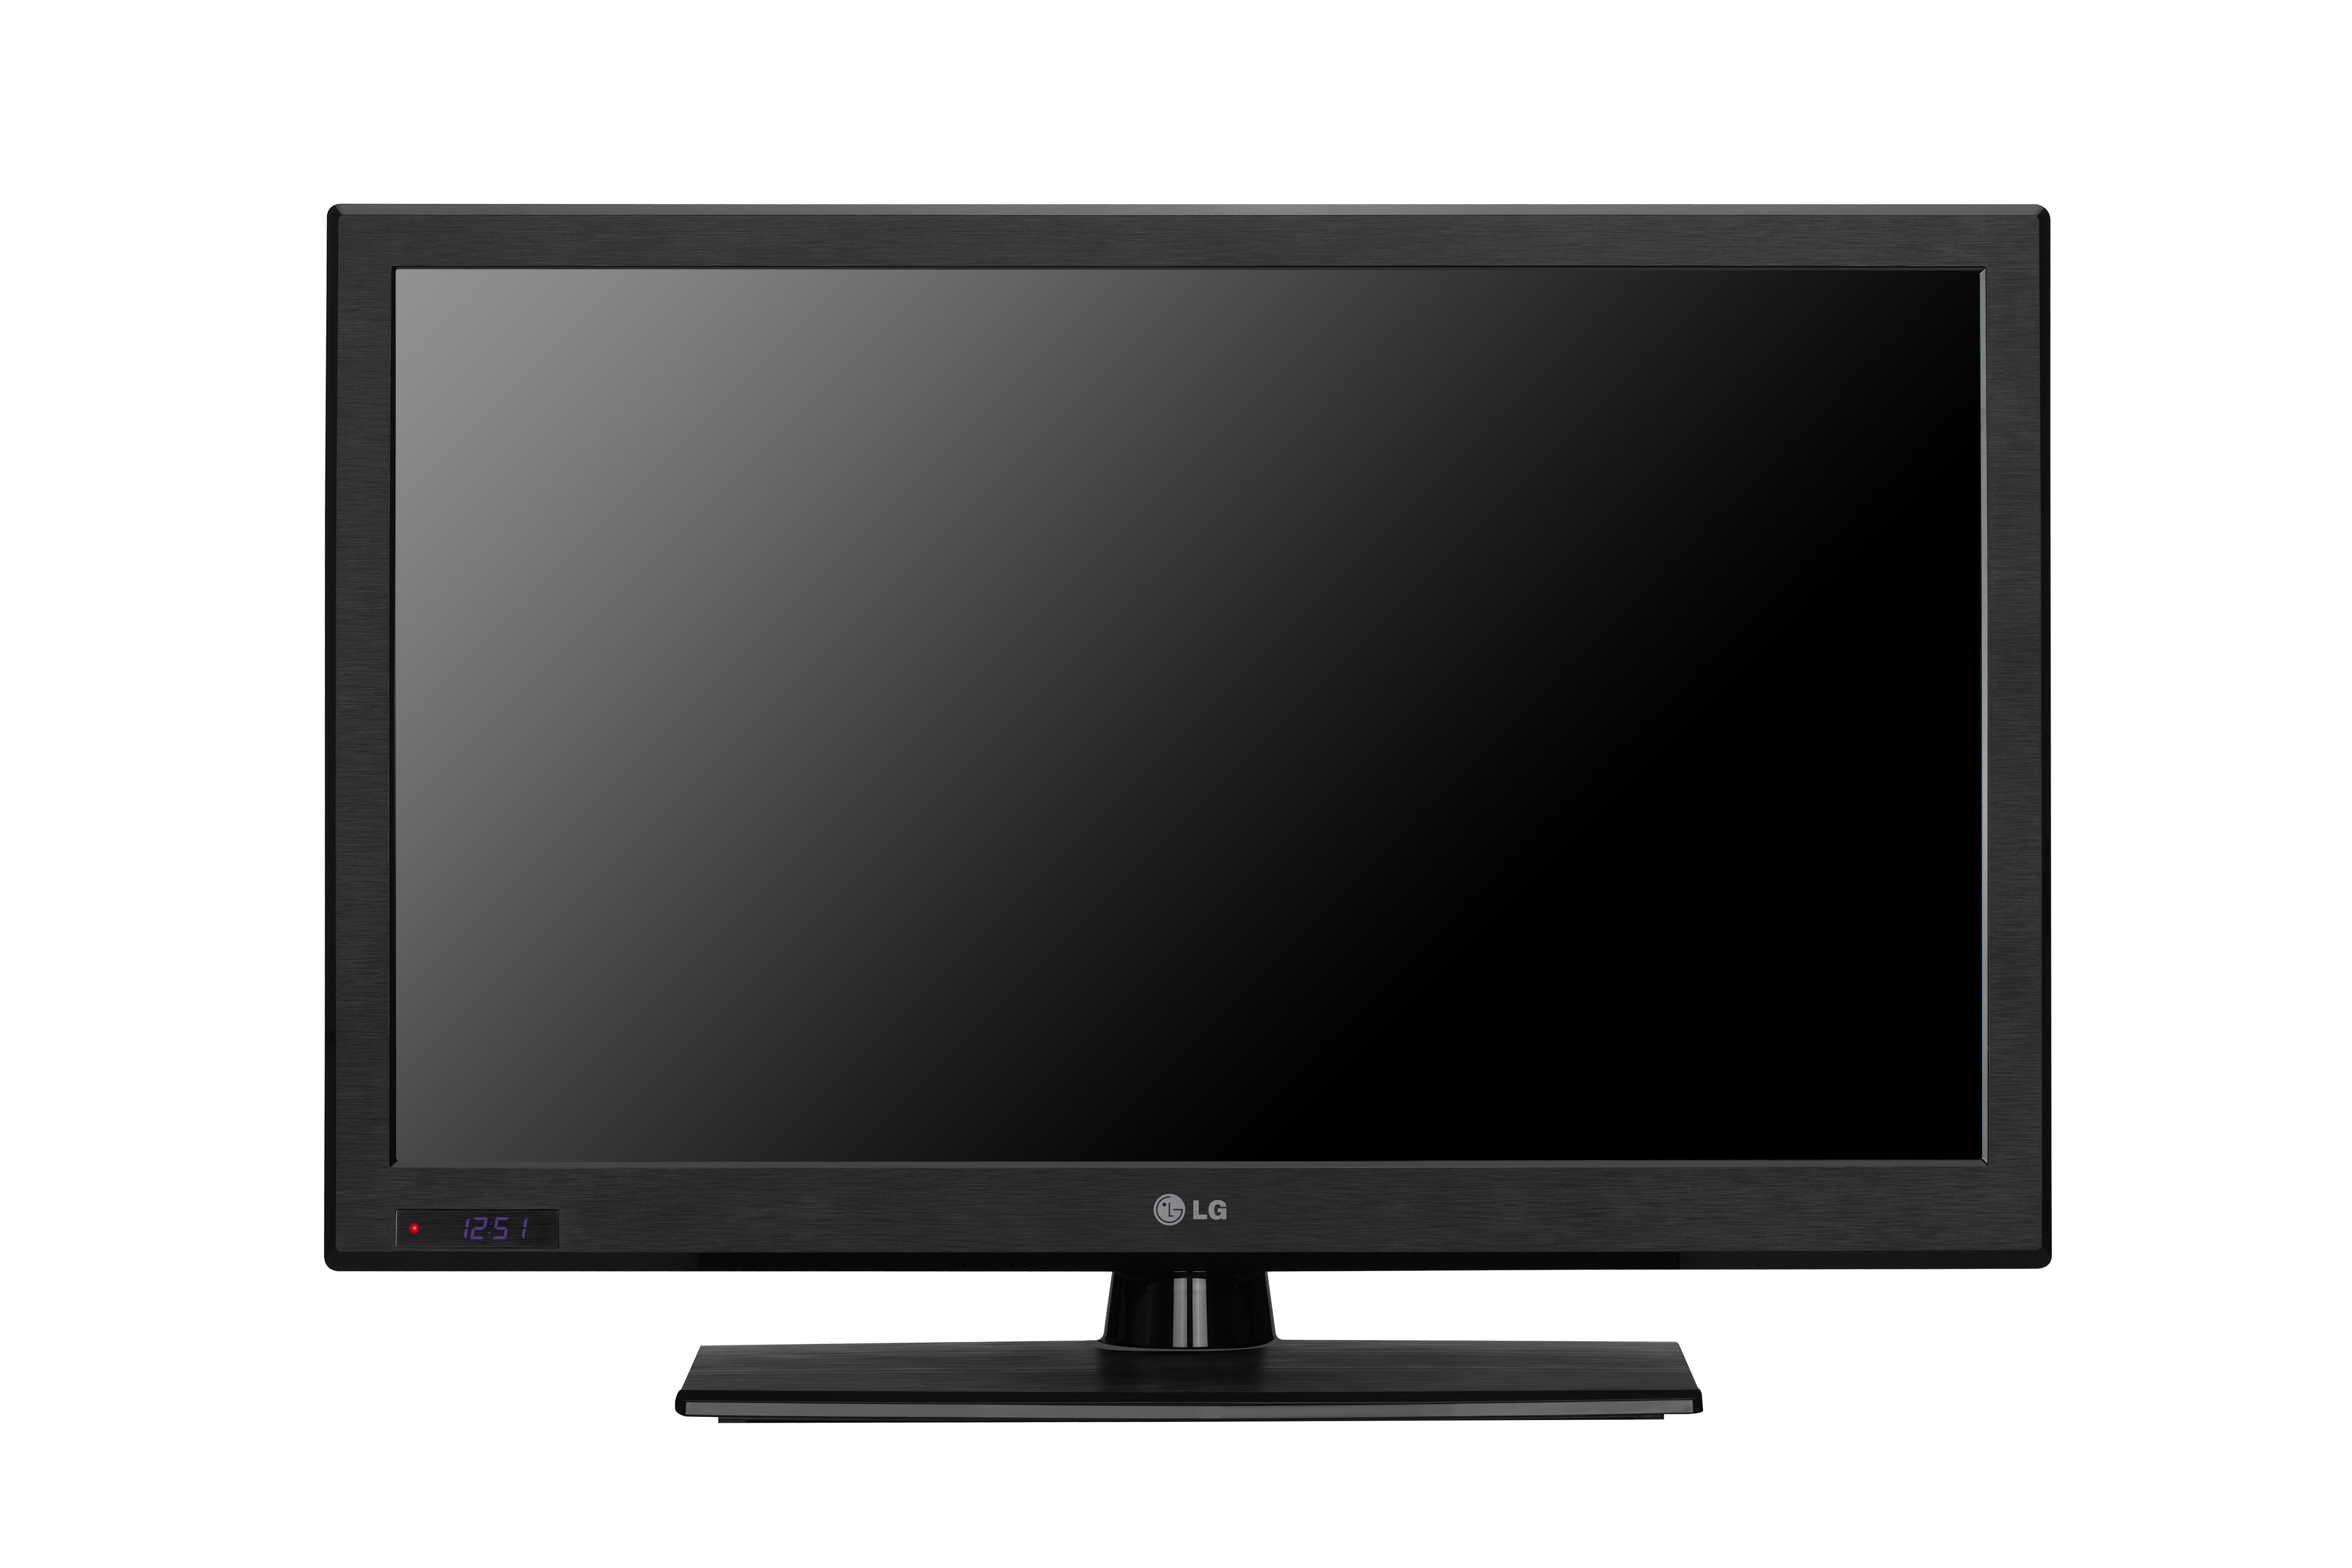 Front view of LG Pro:Centric® Smart Hotel TV model LT760H